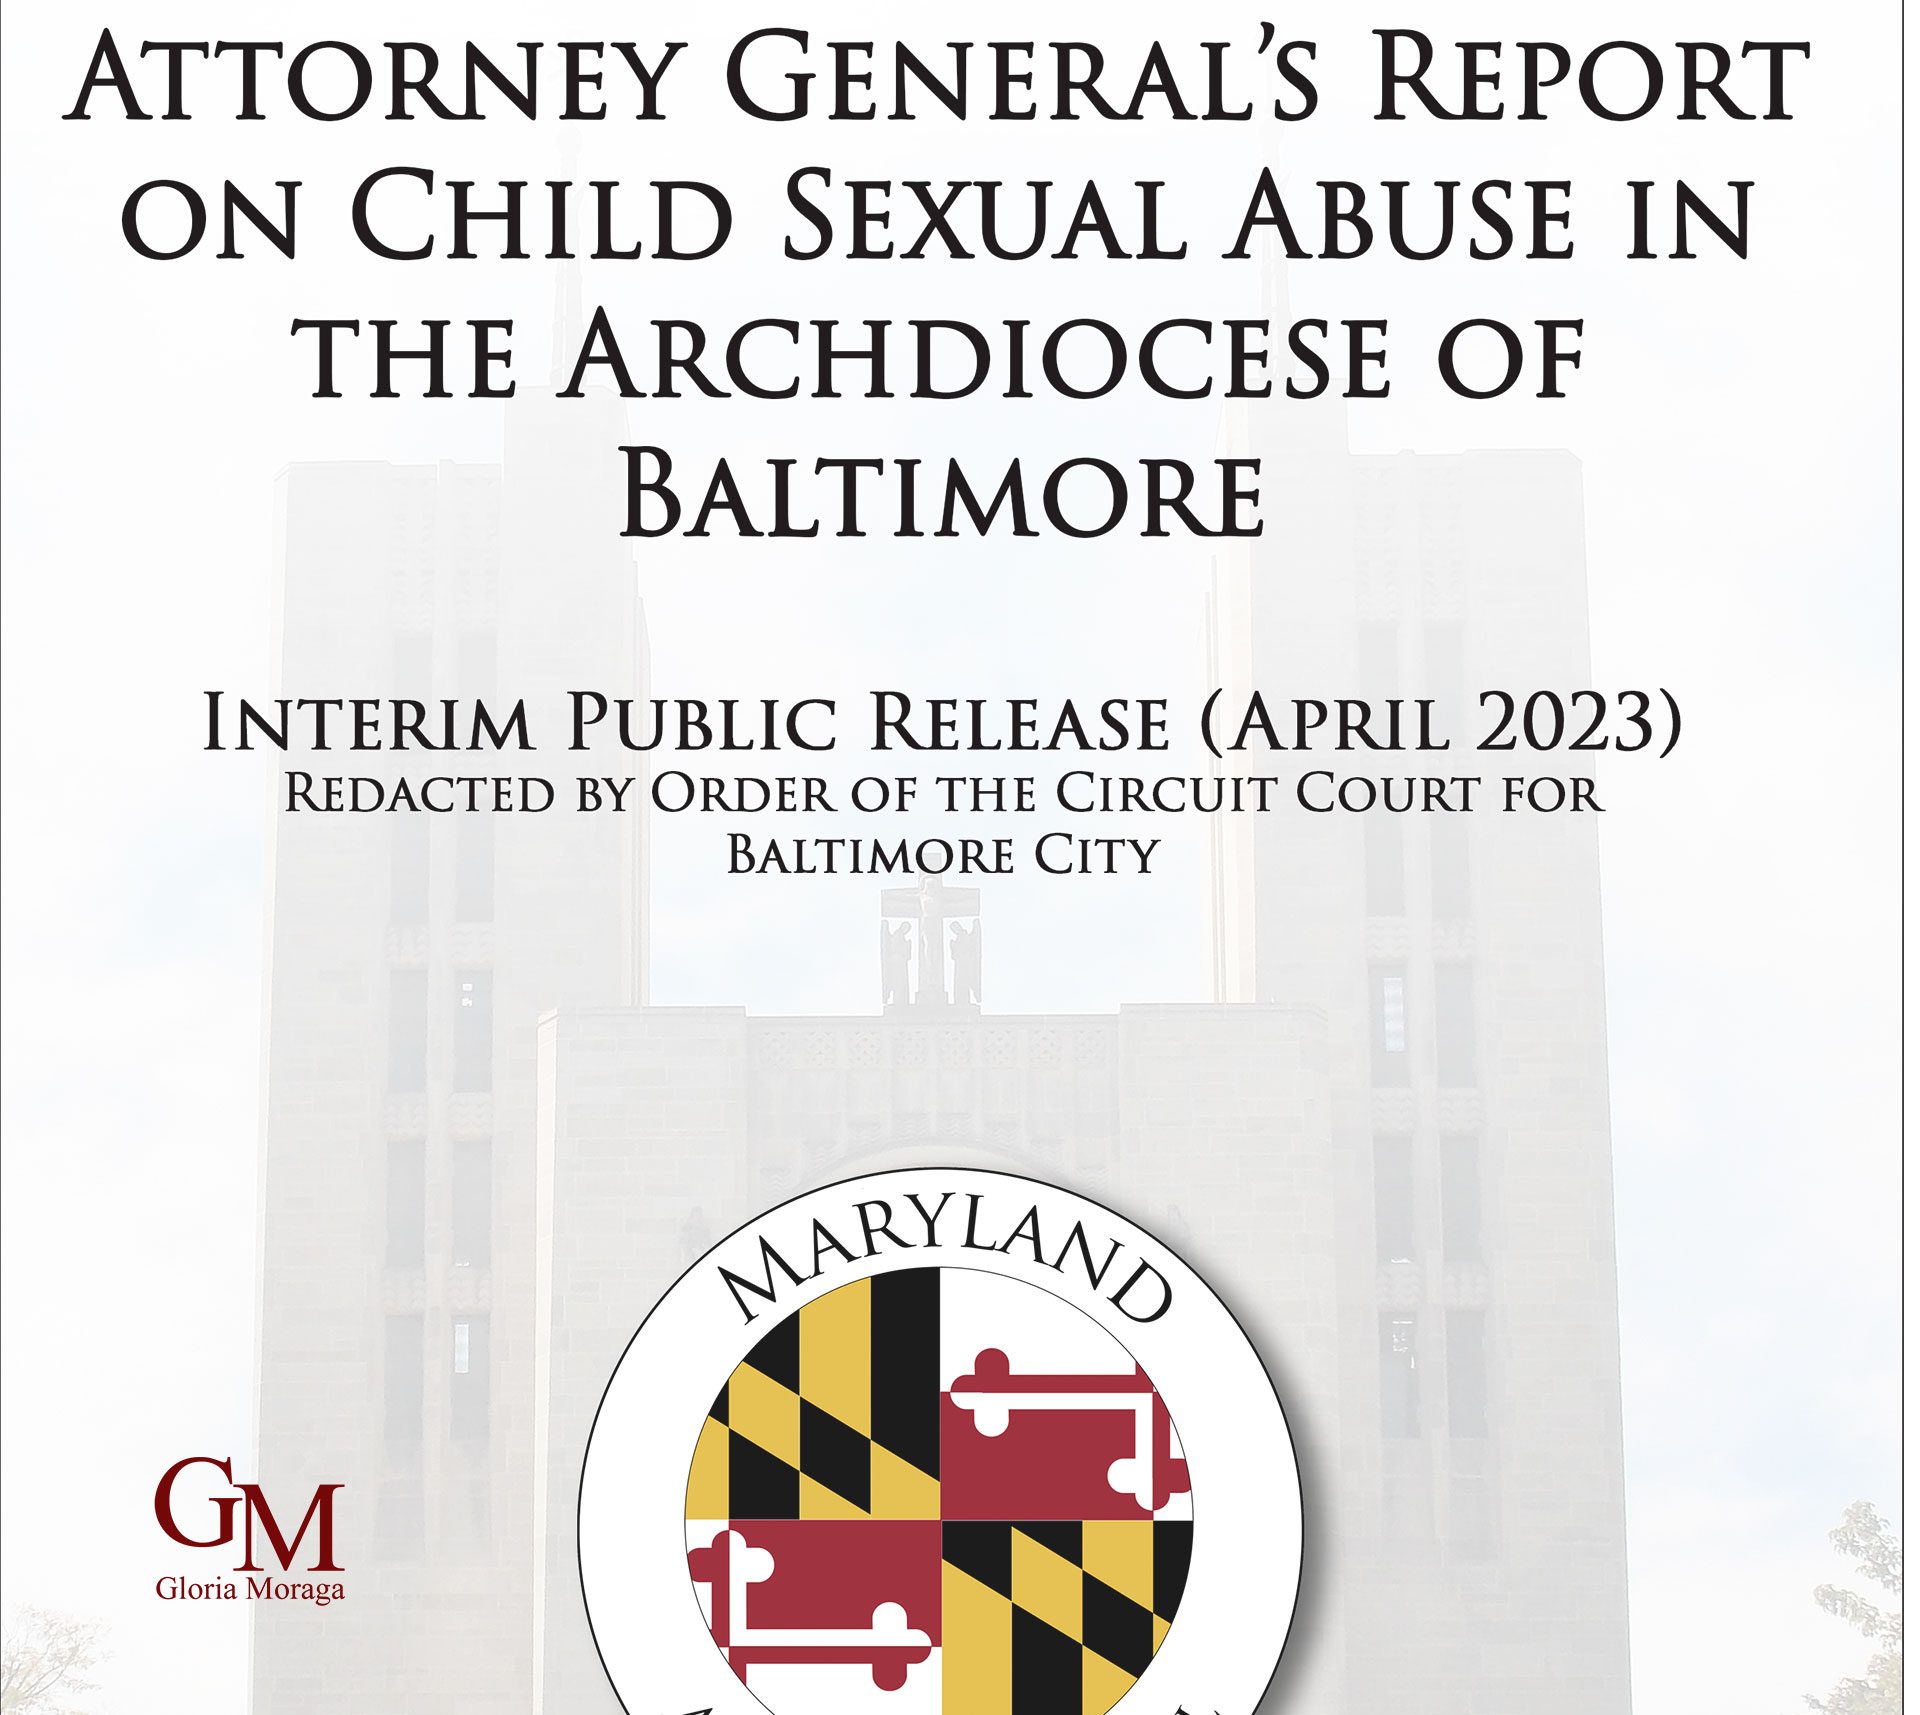 Attorney General's Report on Chiild Sexual Abuse in the Archdiocese of Baltimore